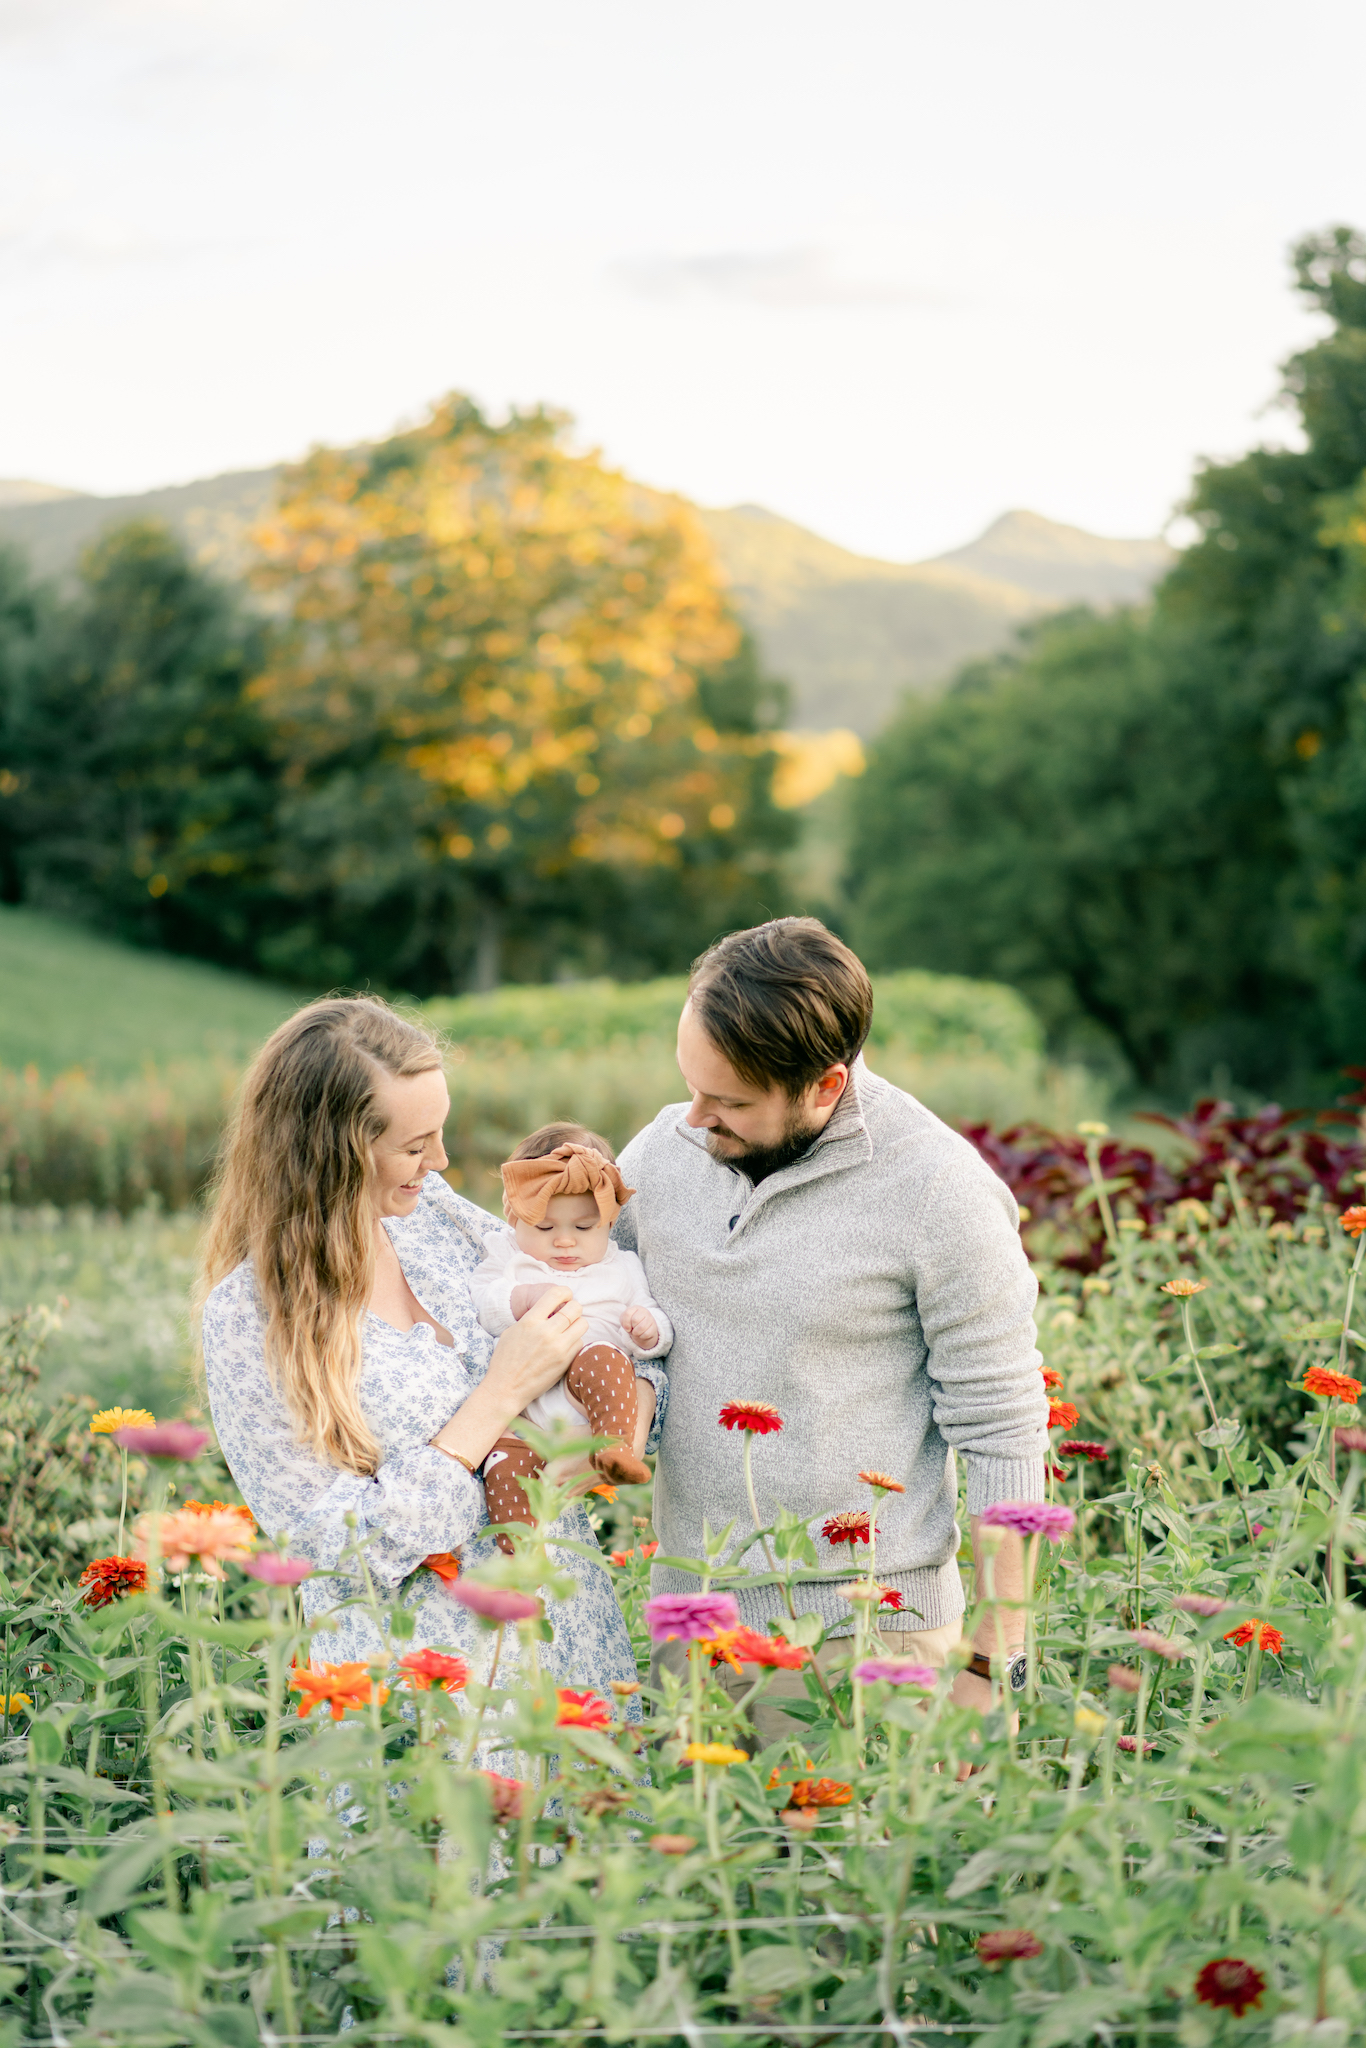 Candid image of Mom, Dad and baby at flower farm. Photo by Lauren Sosler Photography.